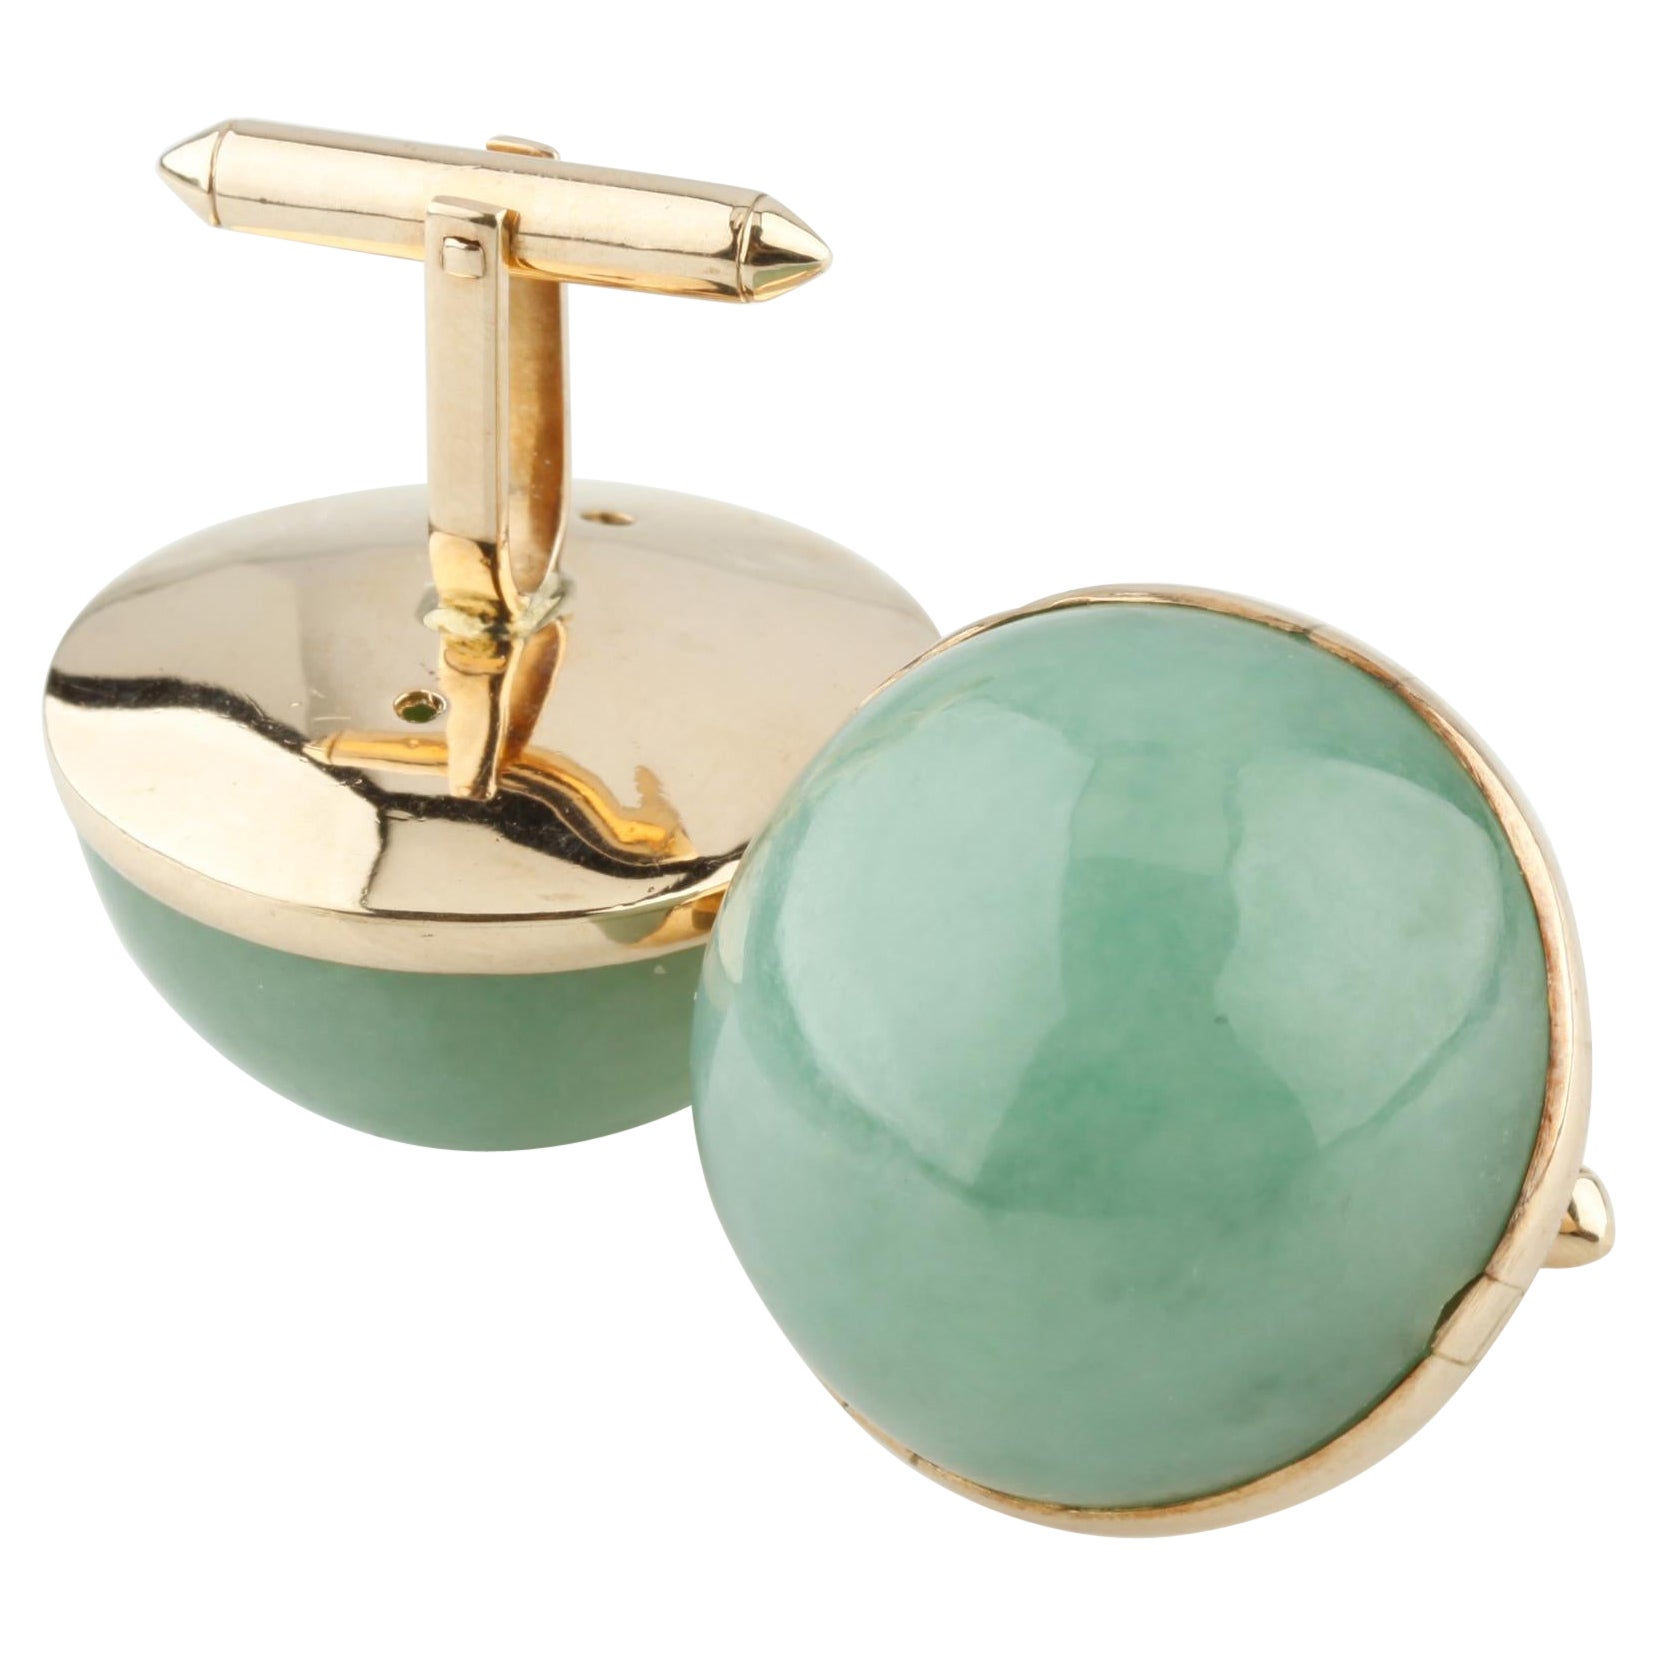 Vintage 14k Yellow Gold Jade 'Over 100 Carat' Cabochon Cufflinks For Sale